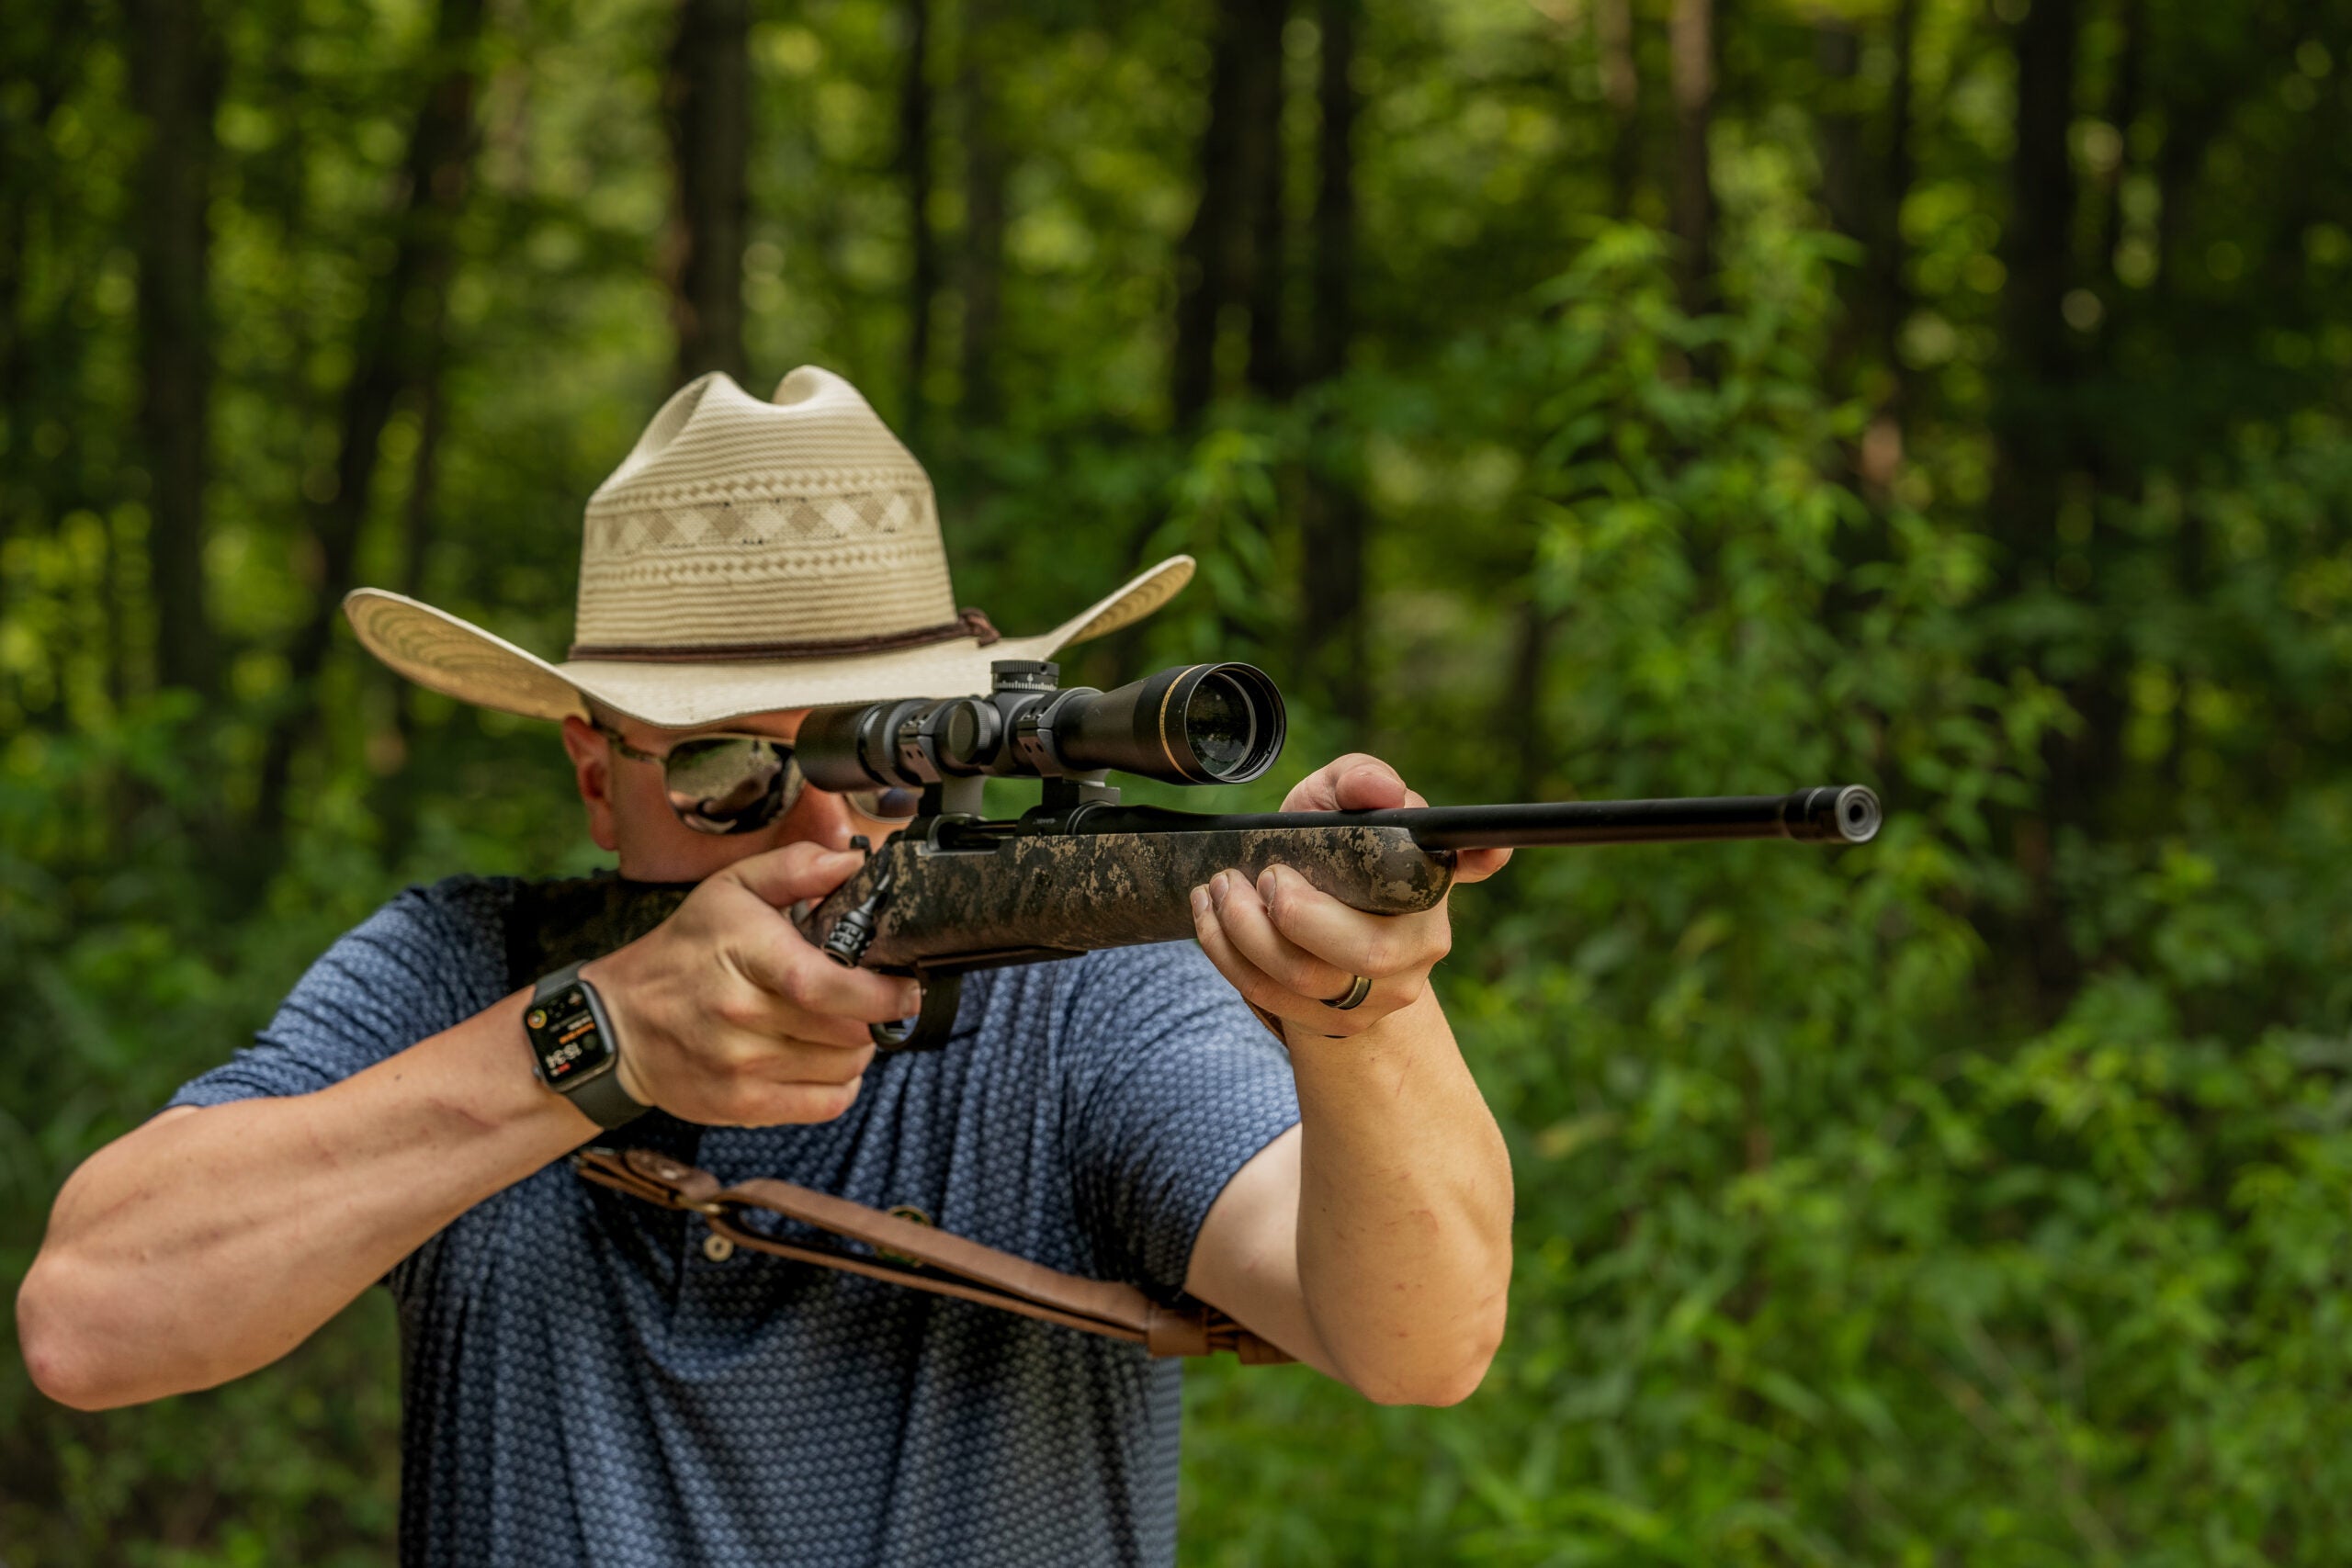 test-panel member shoot offhand with the Wilson Combat NULA rifle